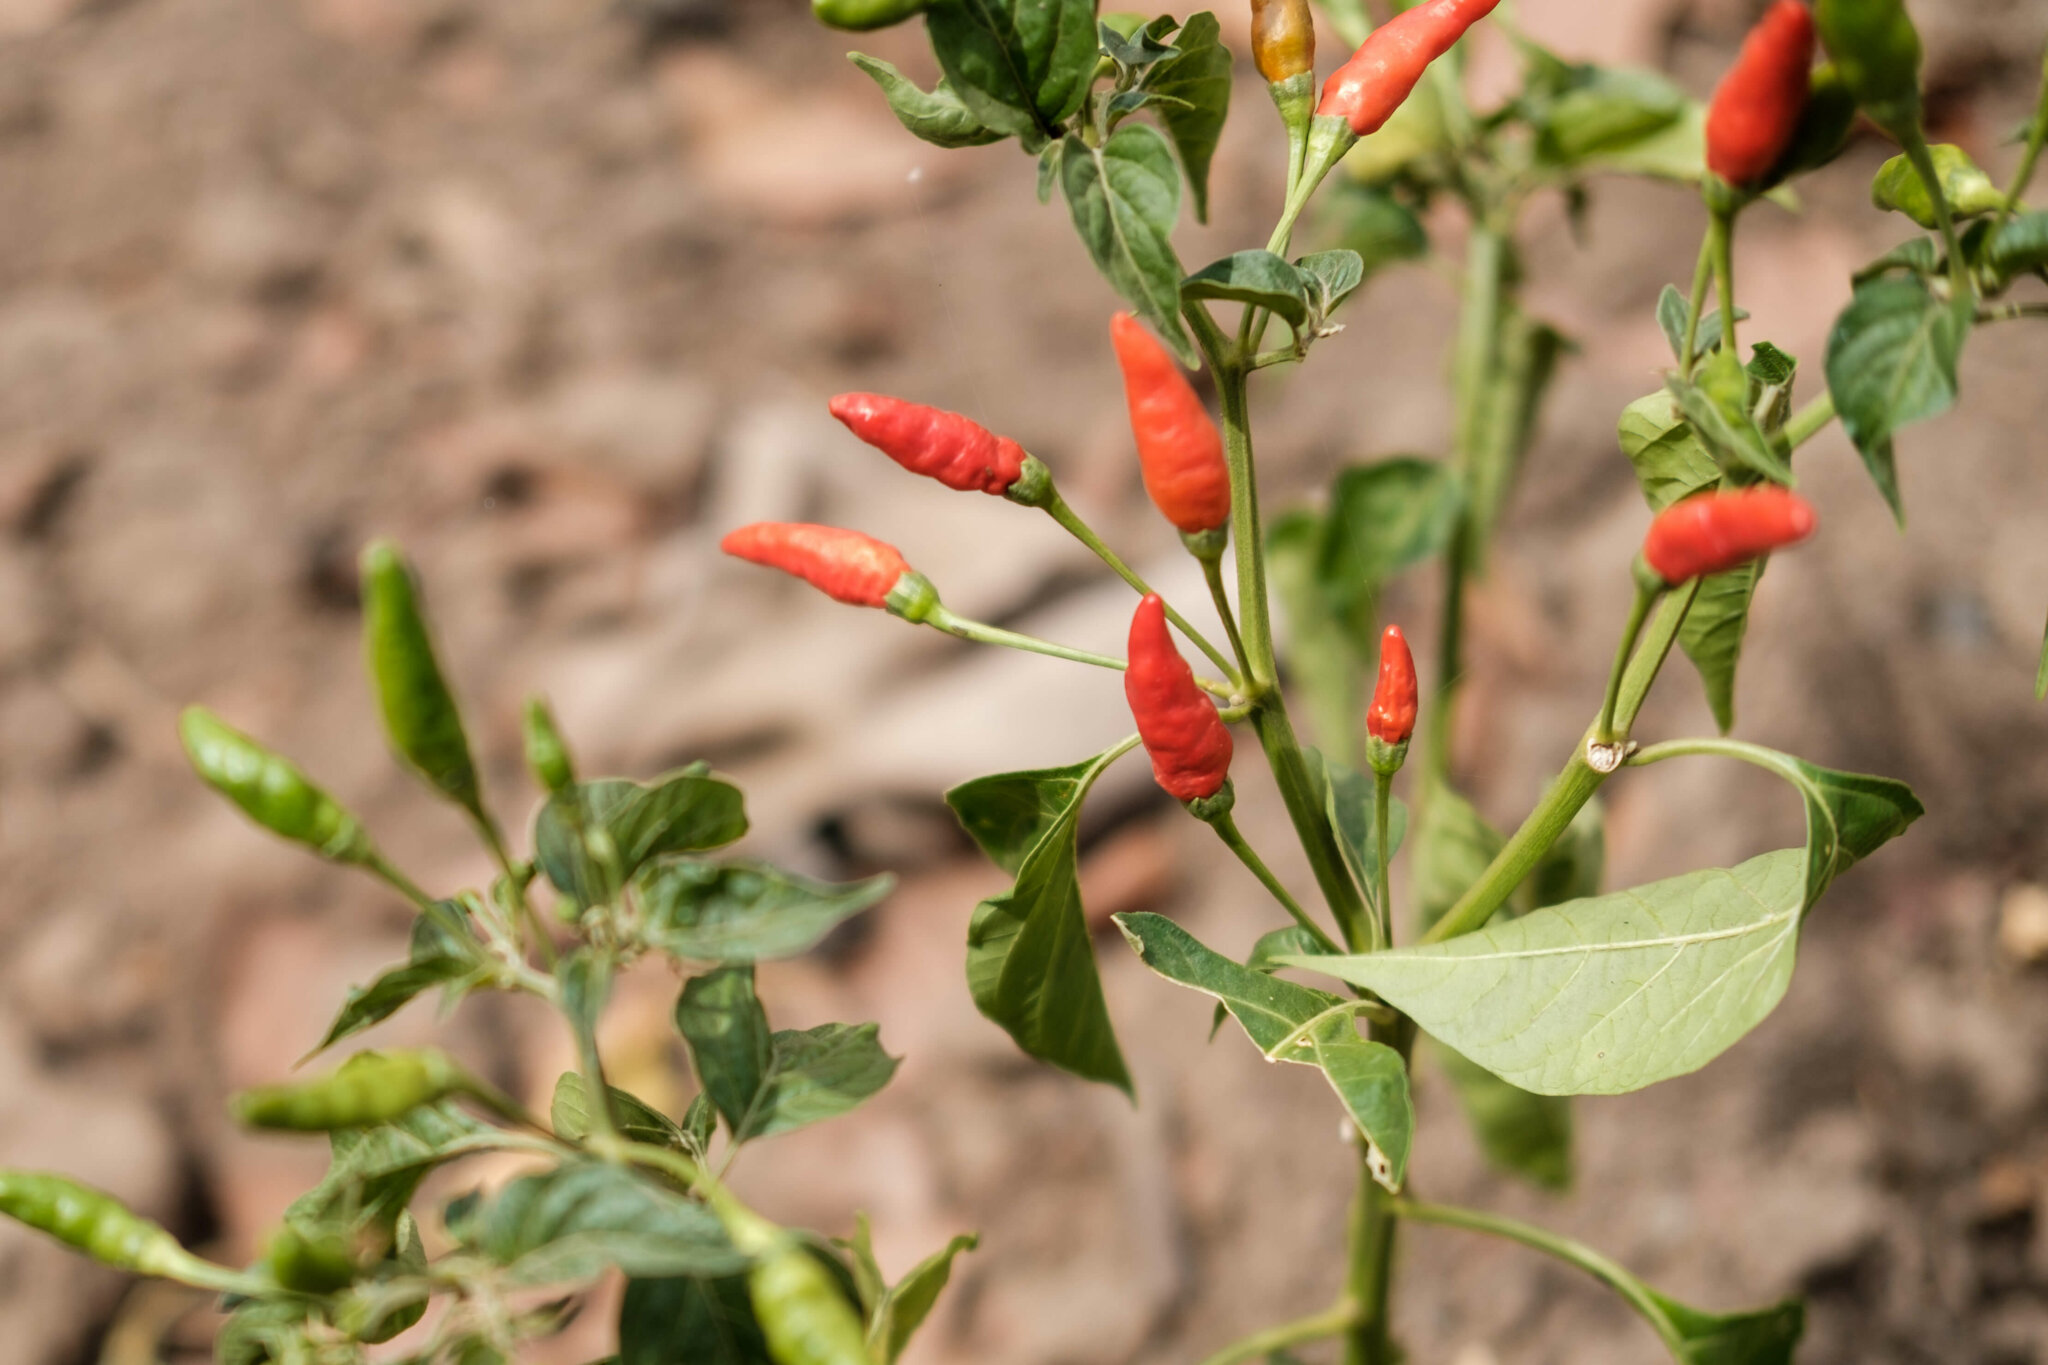 Image of a chili pepper plant.